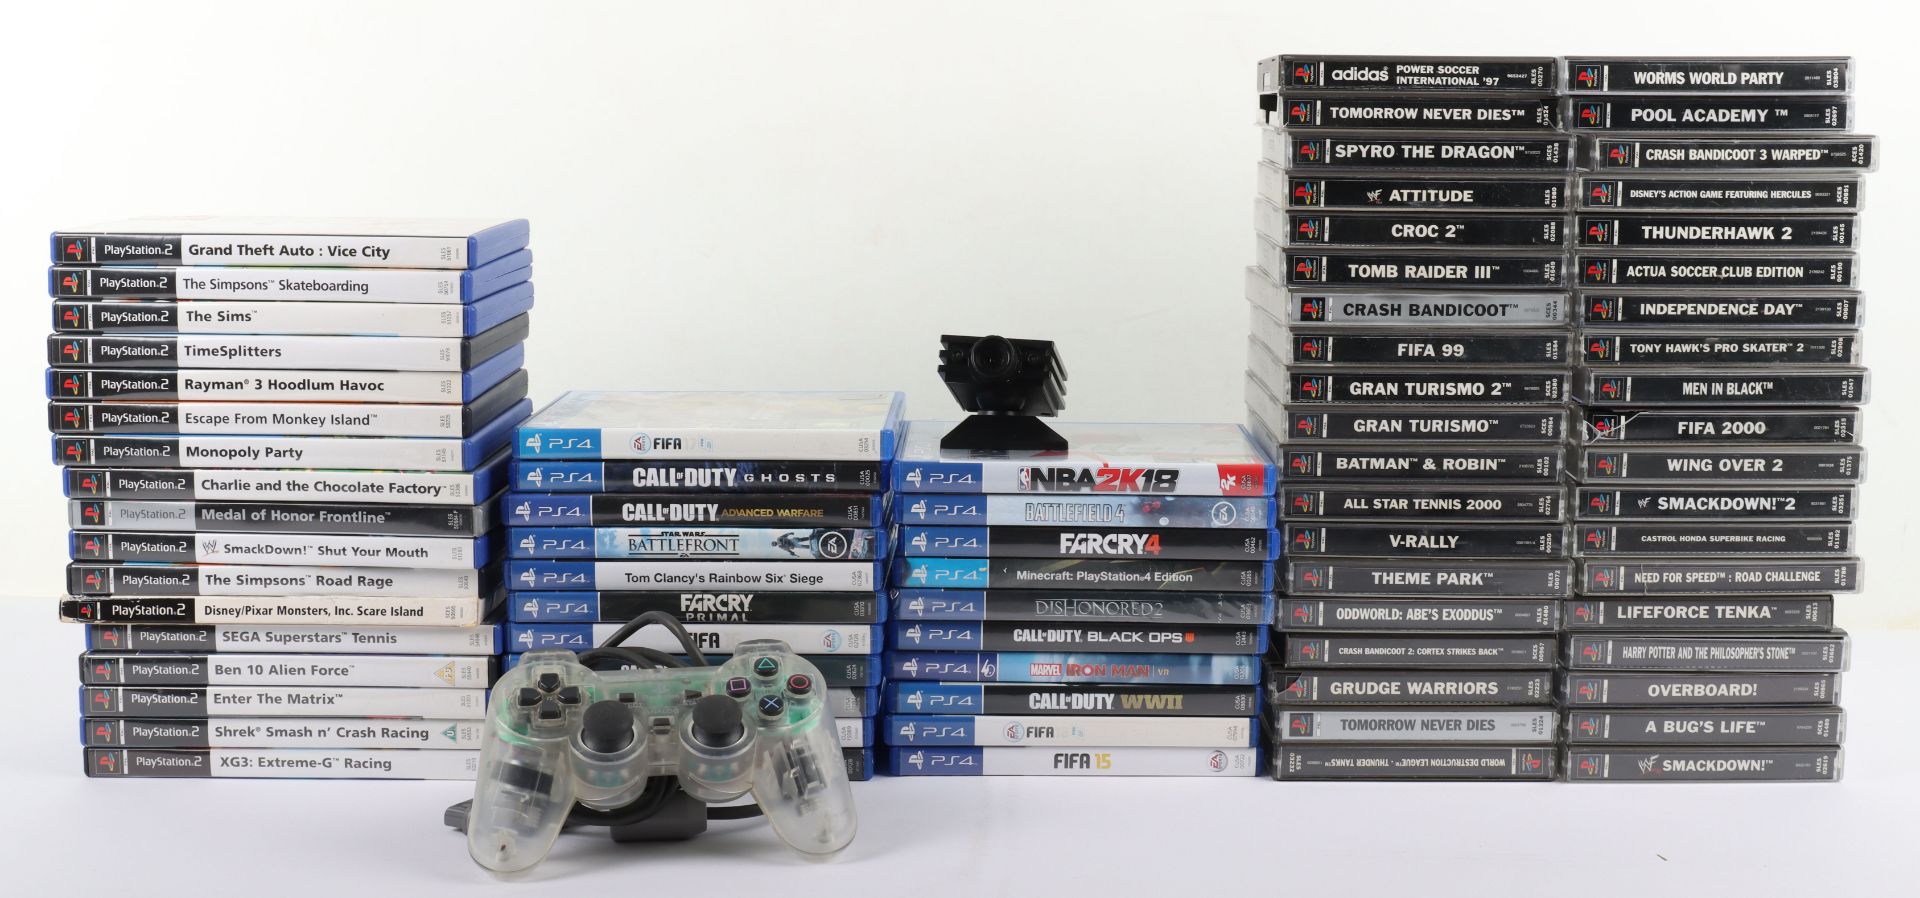 PlayStation, PS2 and PS4 games with controller